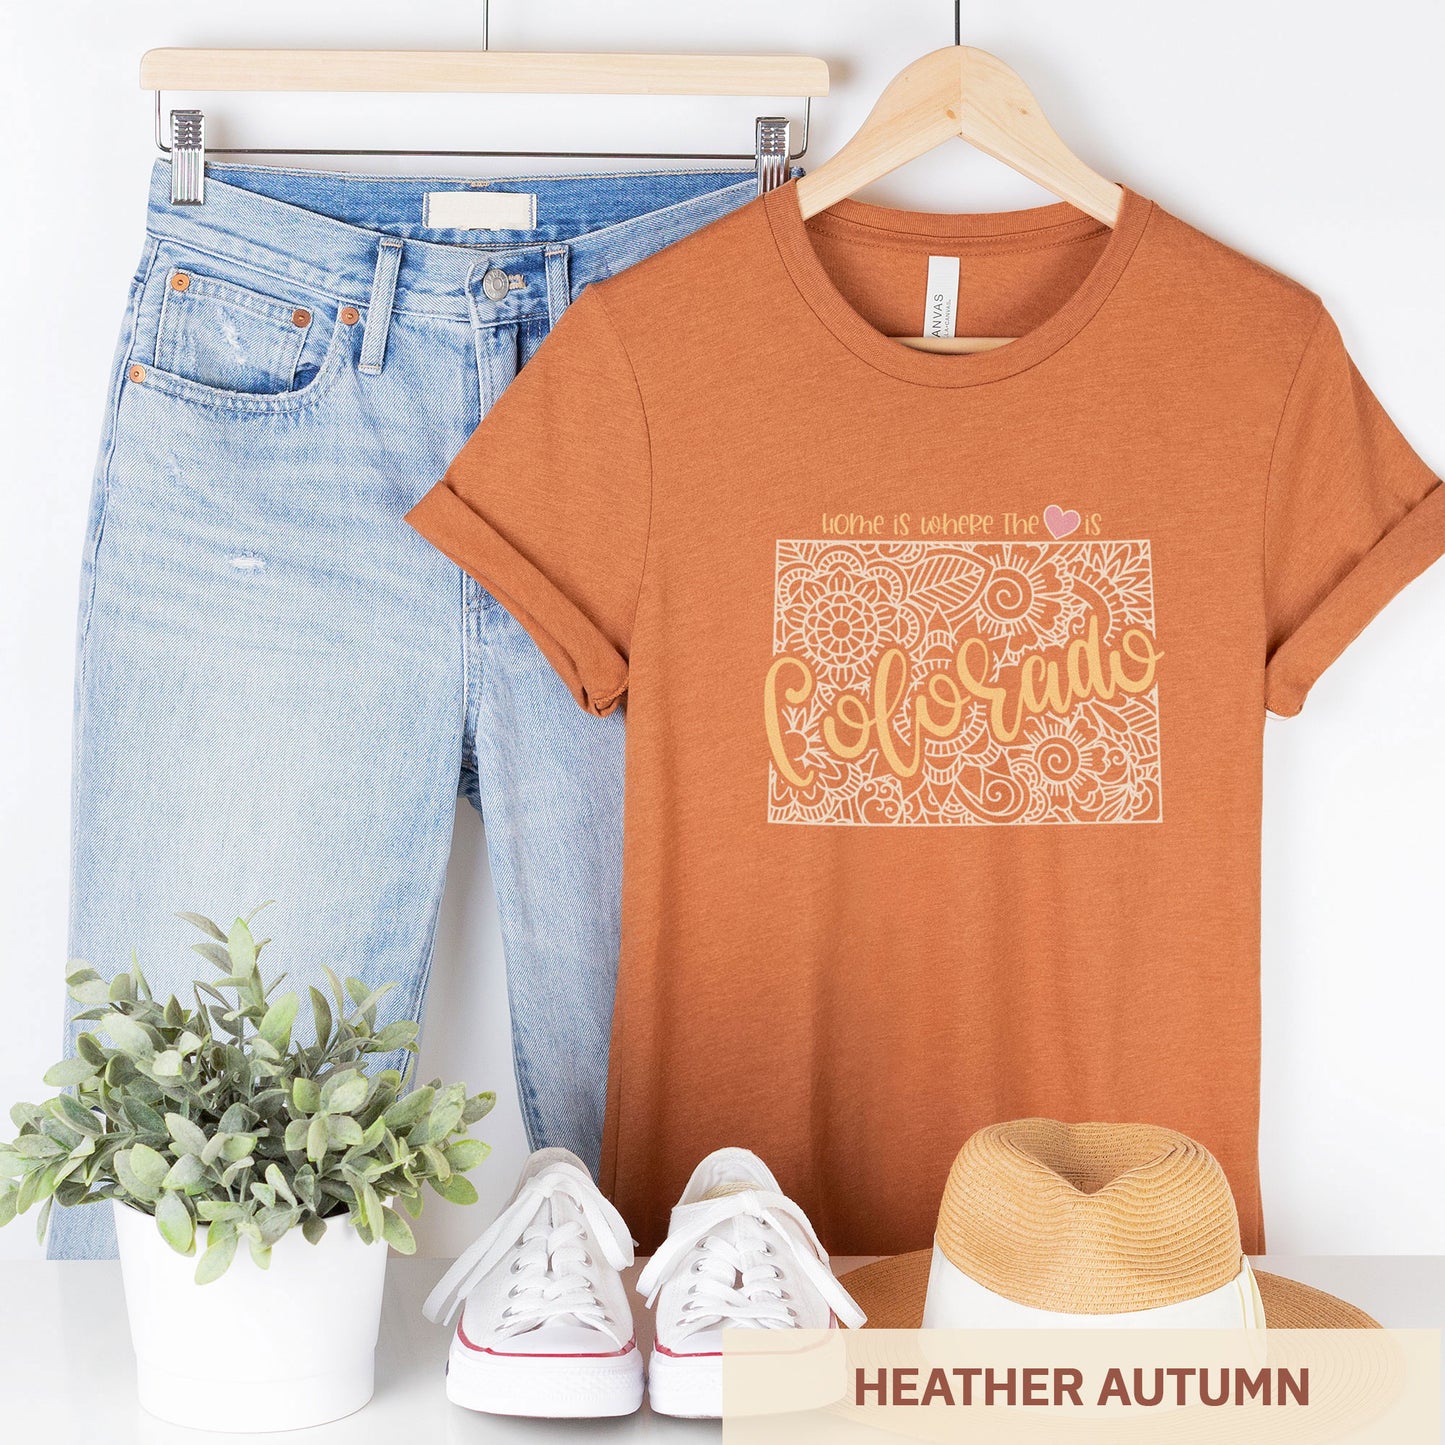  A hanging heather autumn Bella Canvas t-shirt featuring a mandala in the shape of Colorado with the words home is where the heart is.